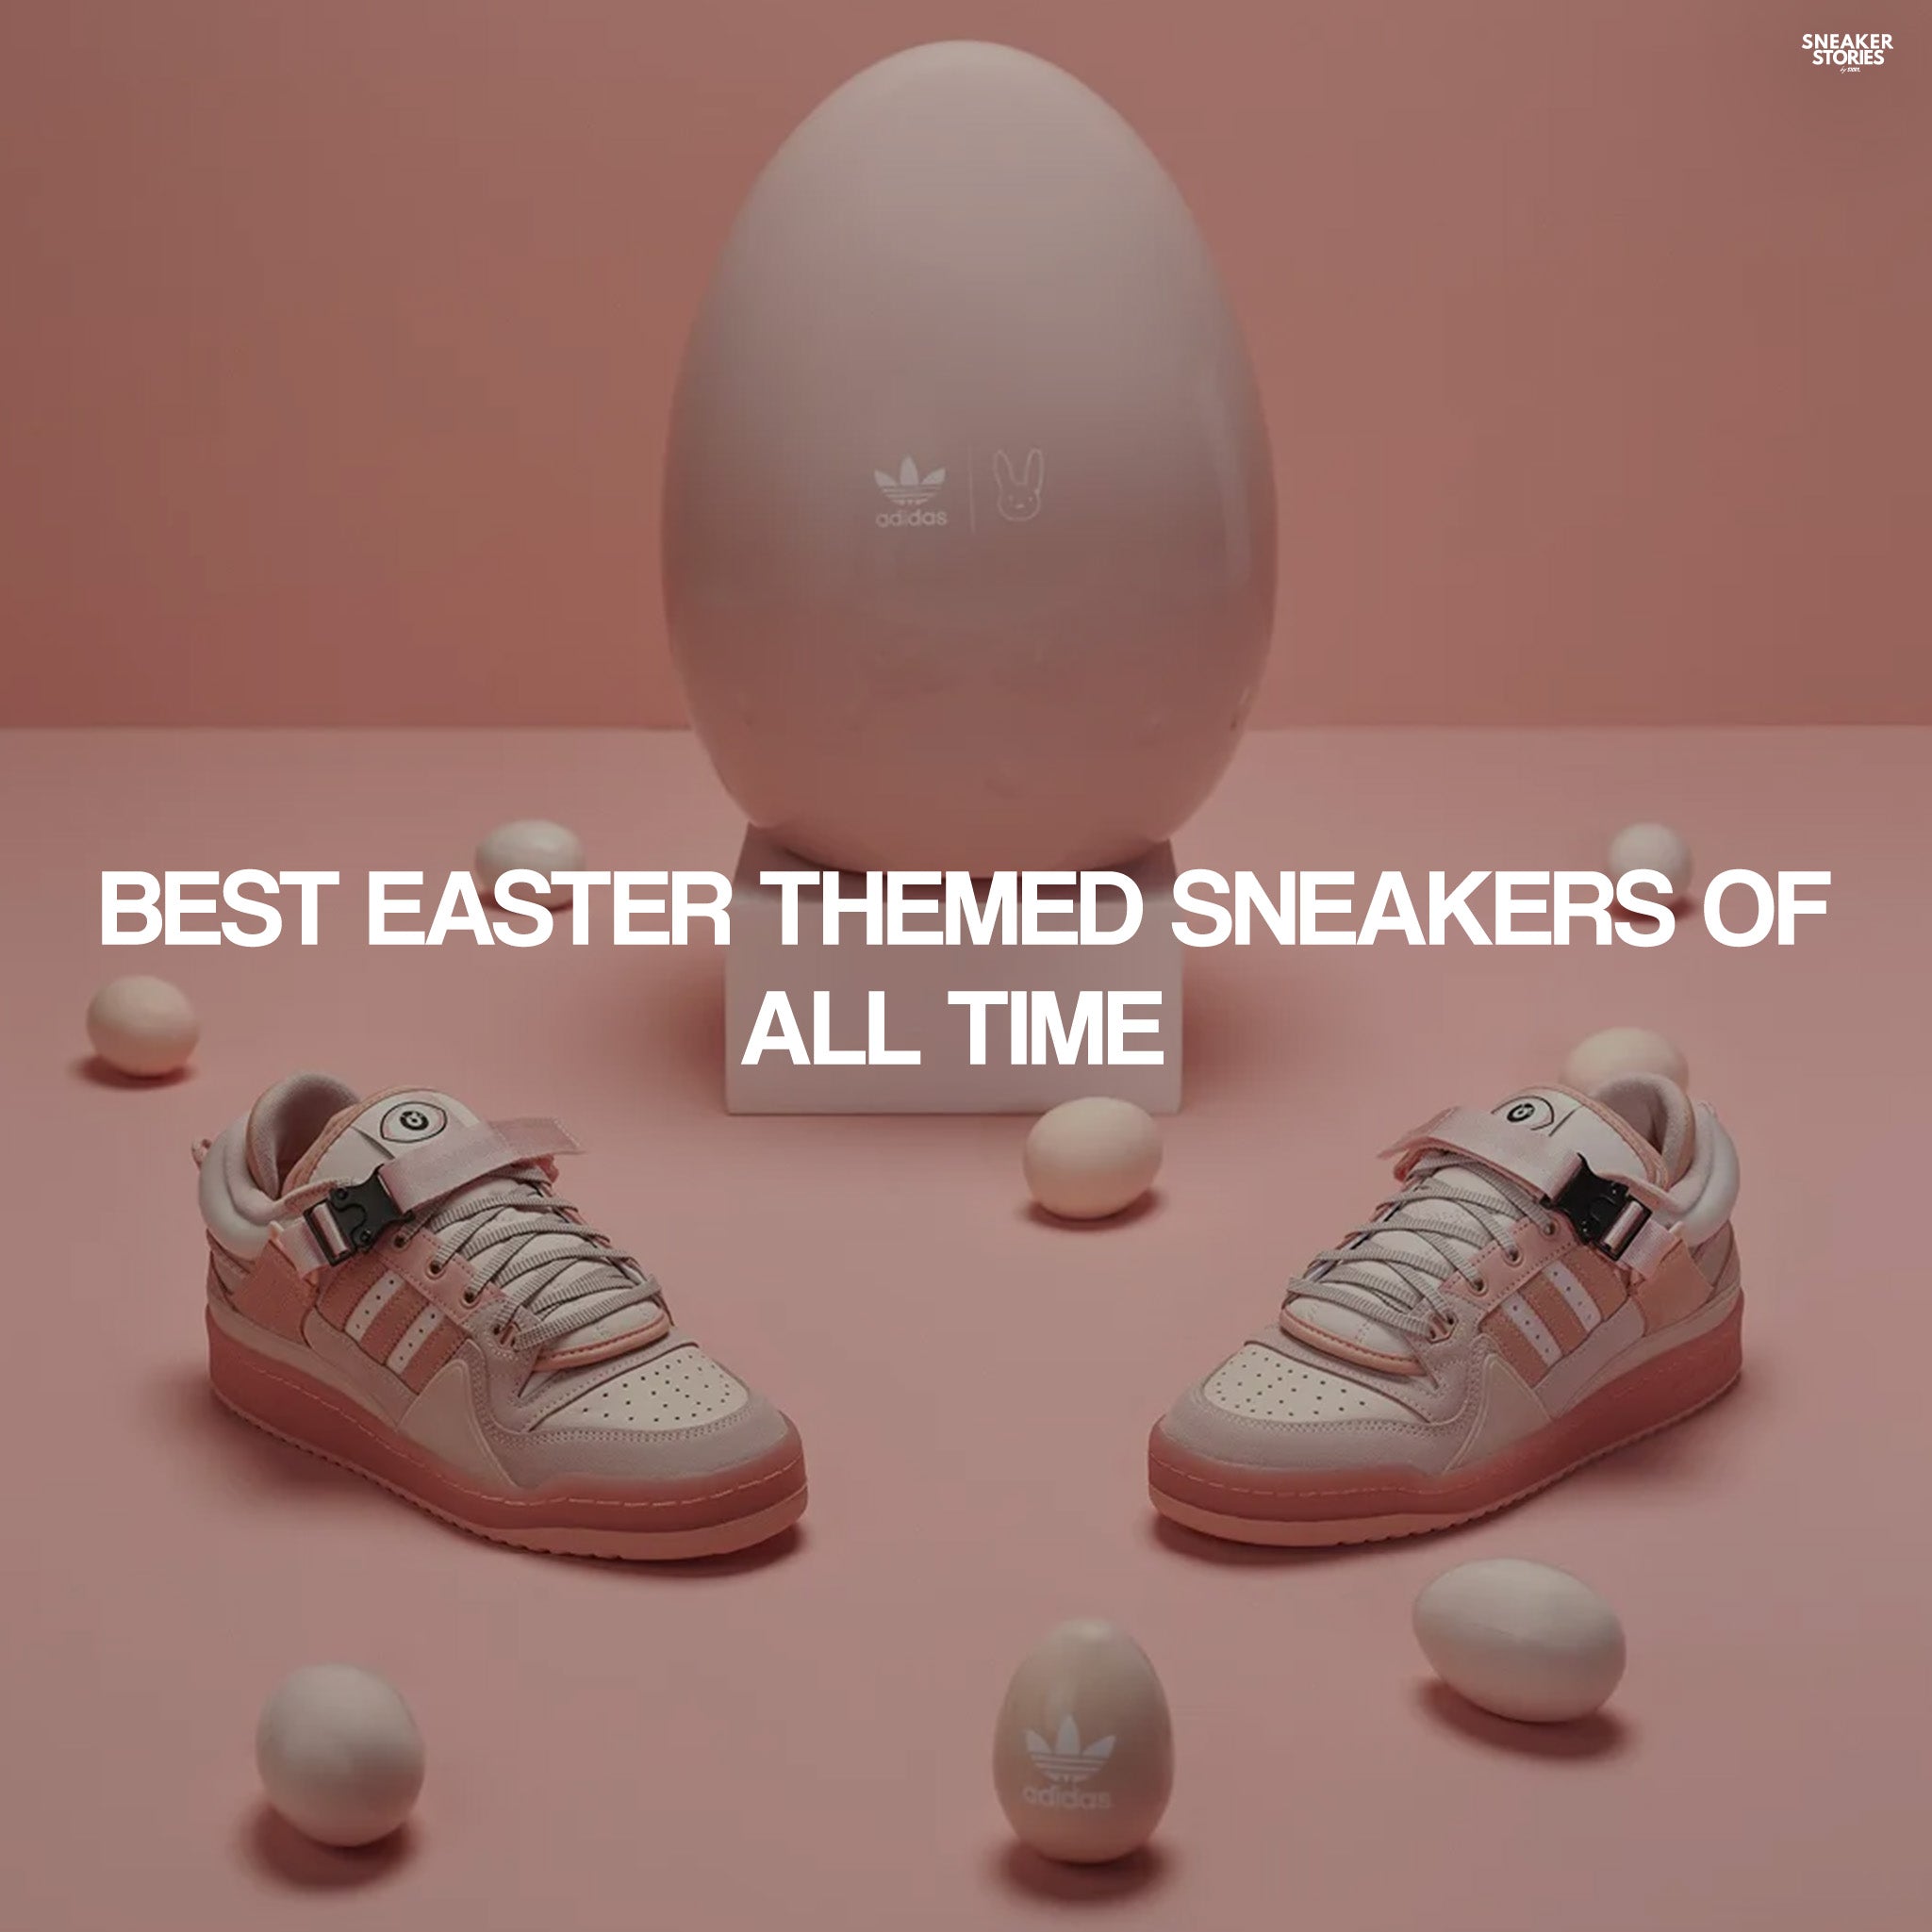 Best Easter themed sneakers of all time